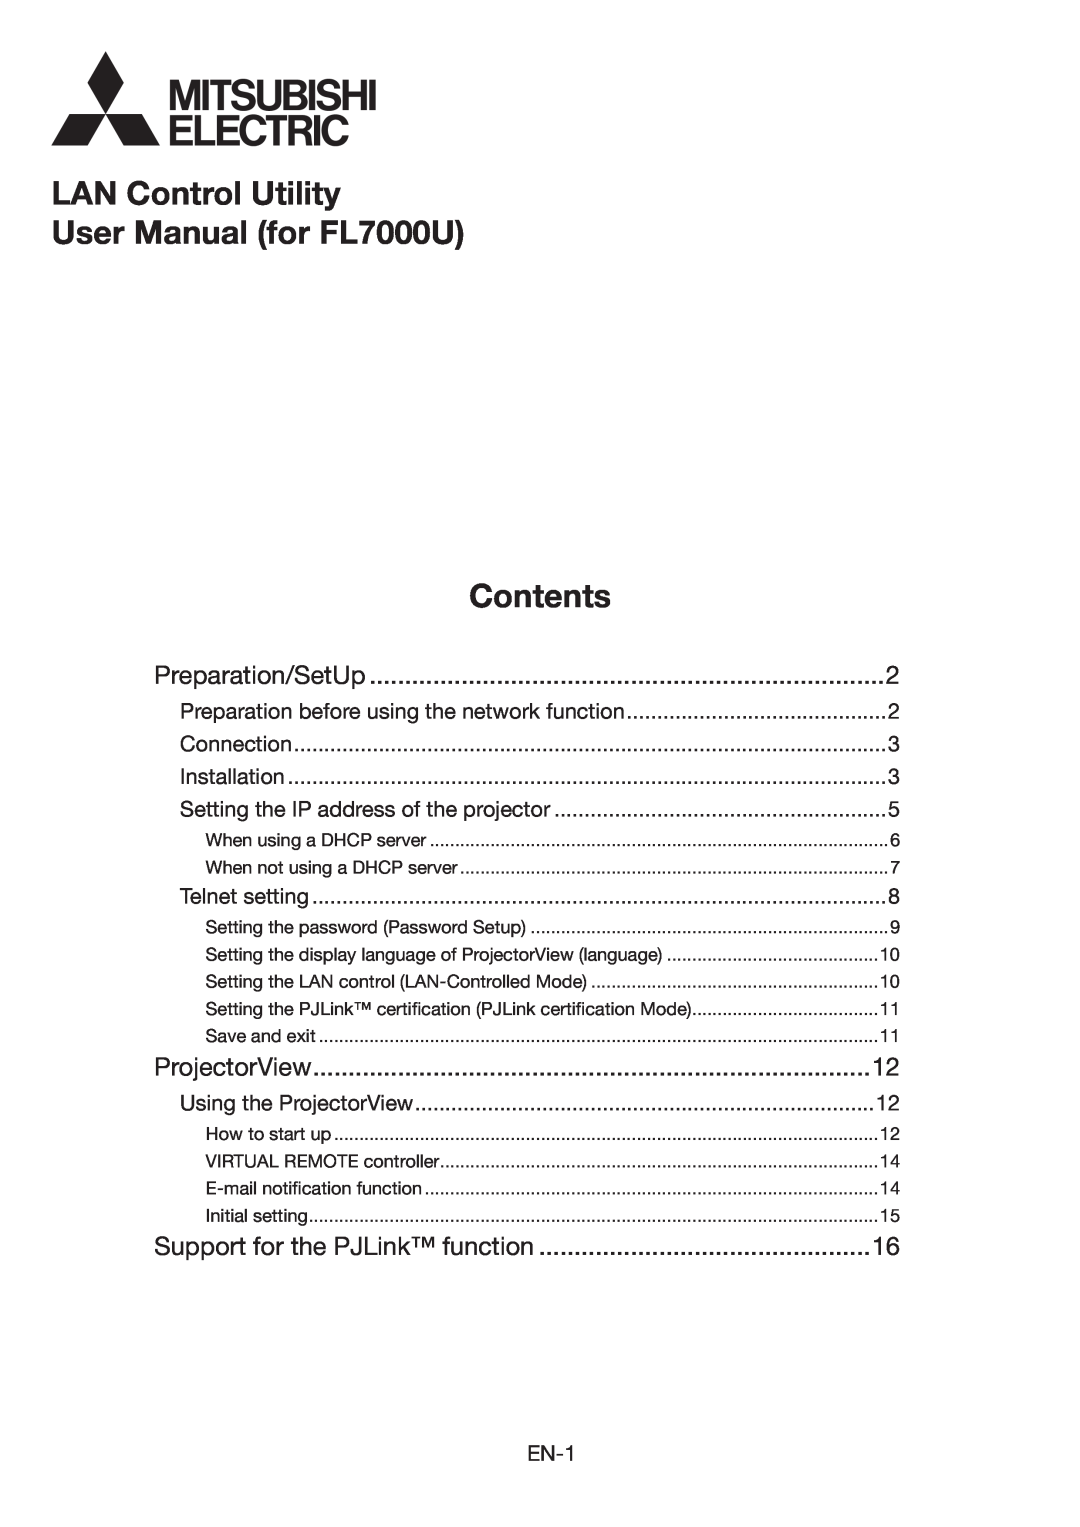 Mitsubishi Electronics user manual LAN Control Utility User Manual for FL7000U, Contents, Connection, Installation 